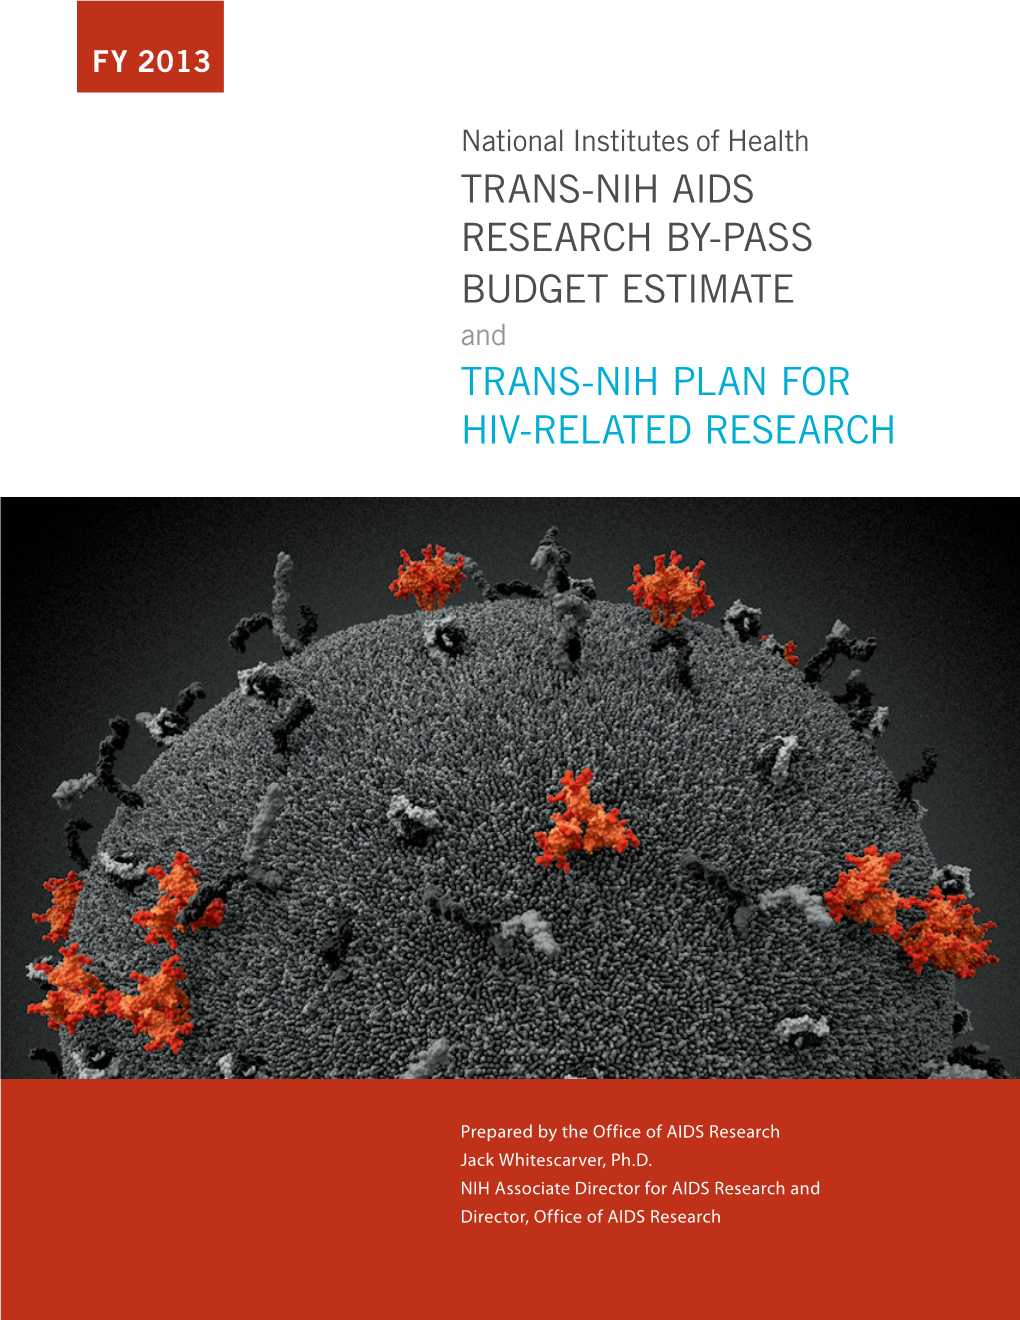 FY 2013 Trans-NIH AIDS Research By-Pass Budget Estimate and Trans